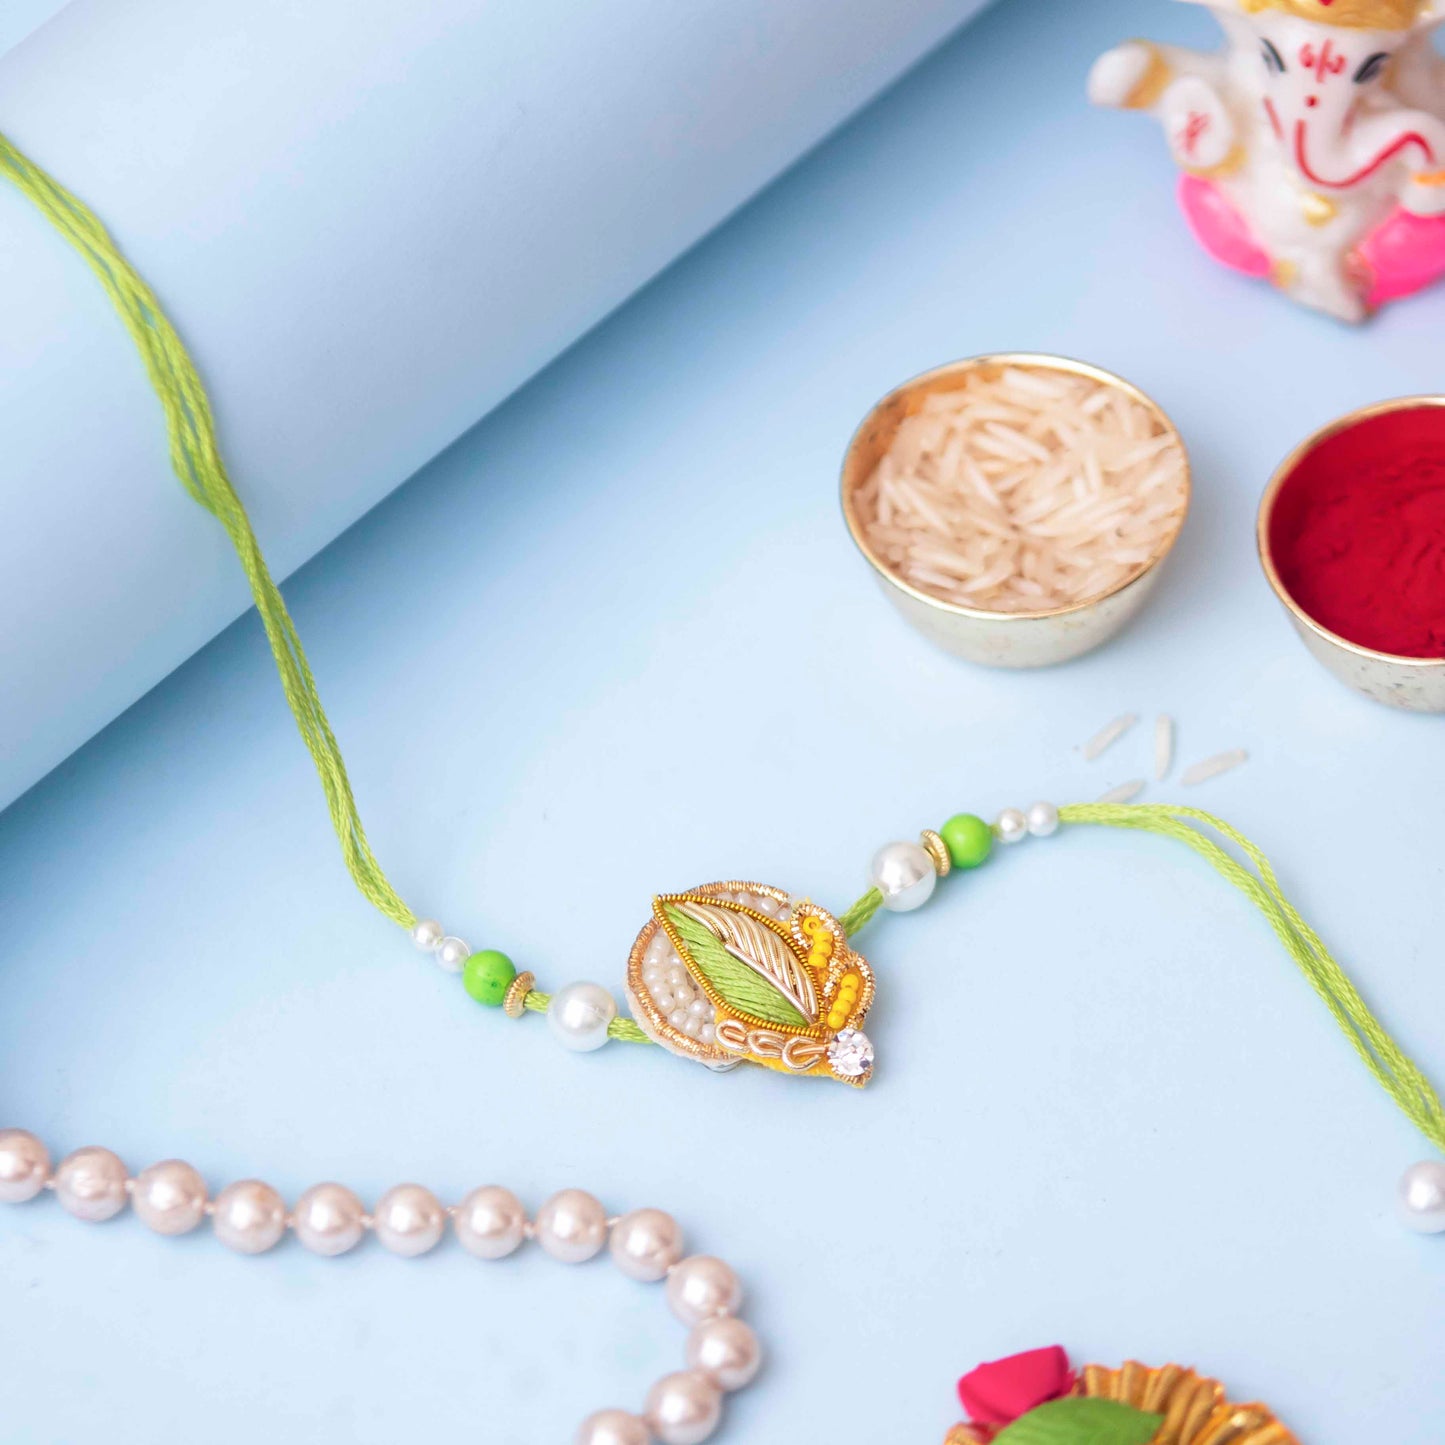 A small Zari rakhi with leaf design, beads, and stone, next to a small gift on a blue background.